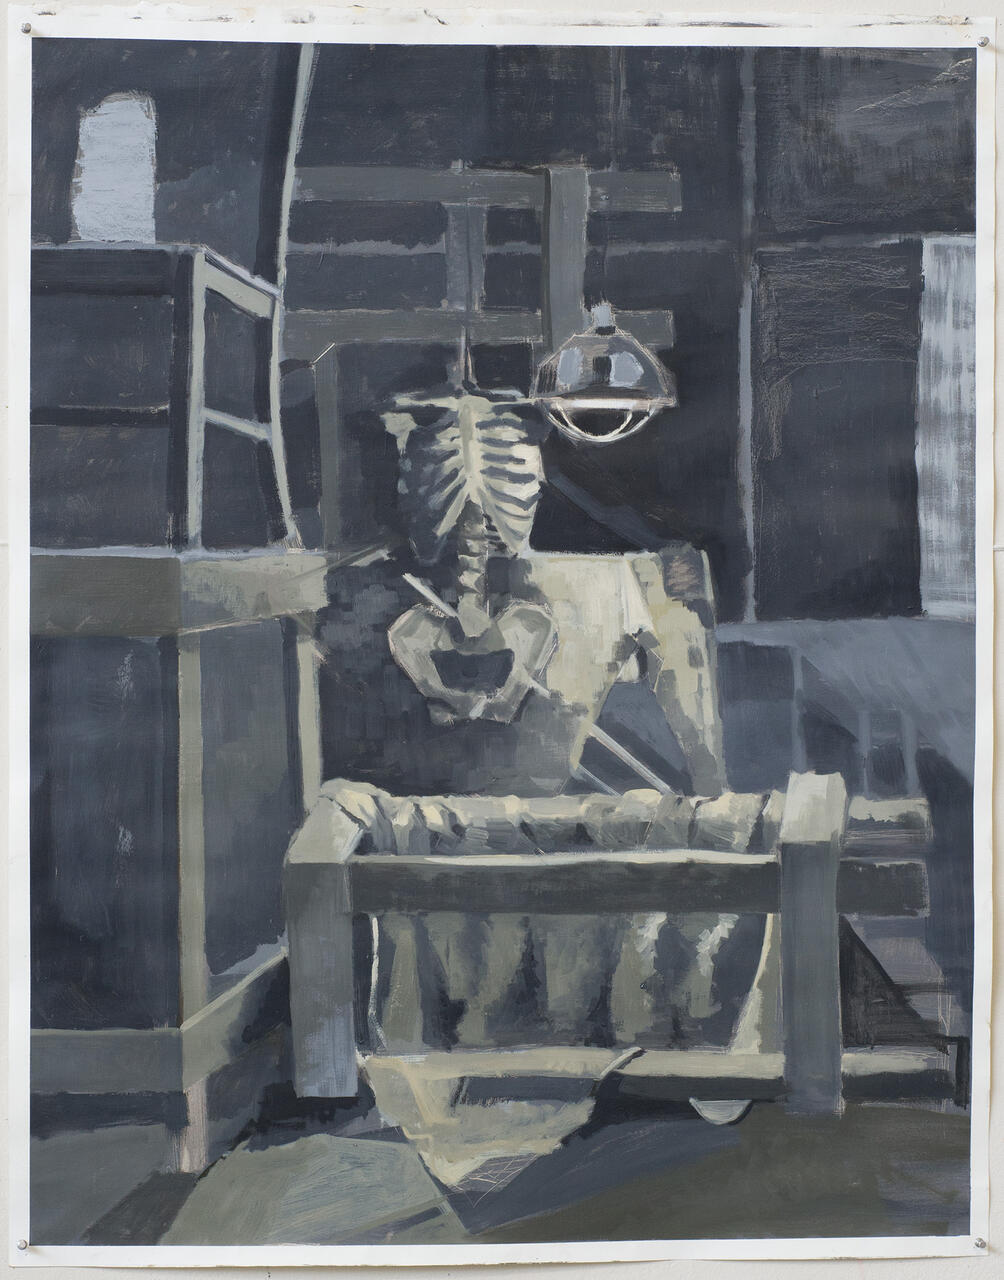 Still life painting emphasizing a skeleton in the center of the composition.